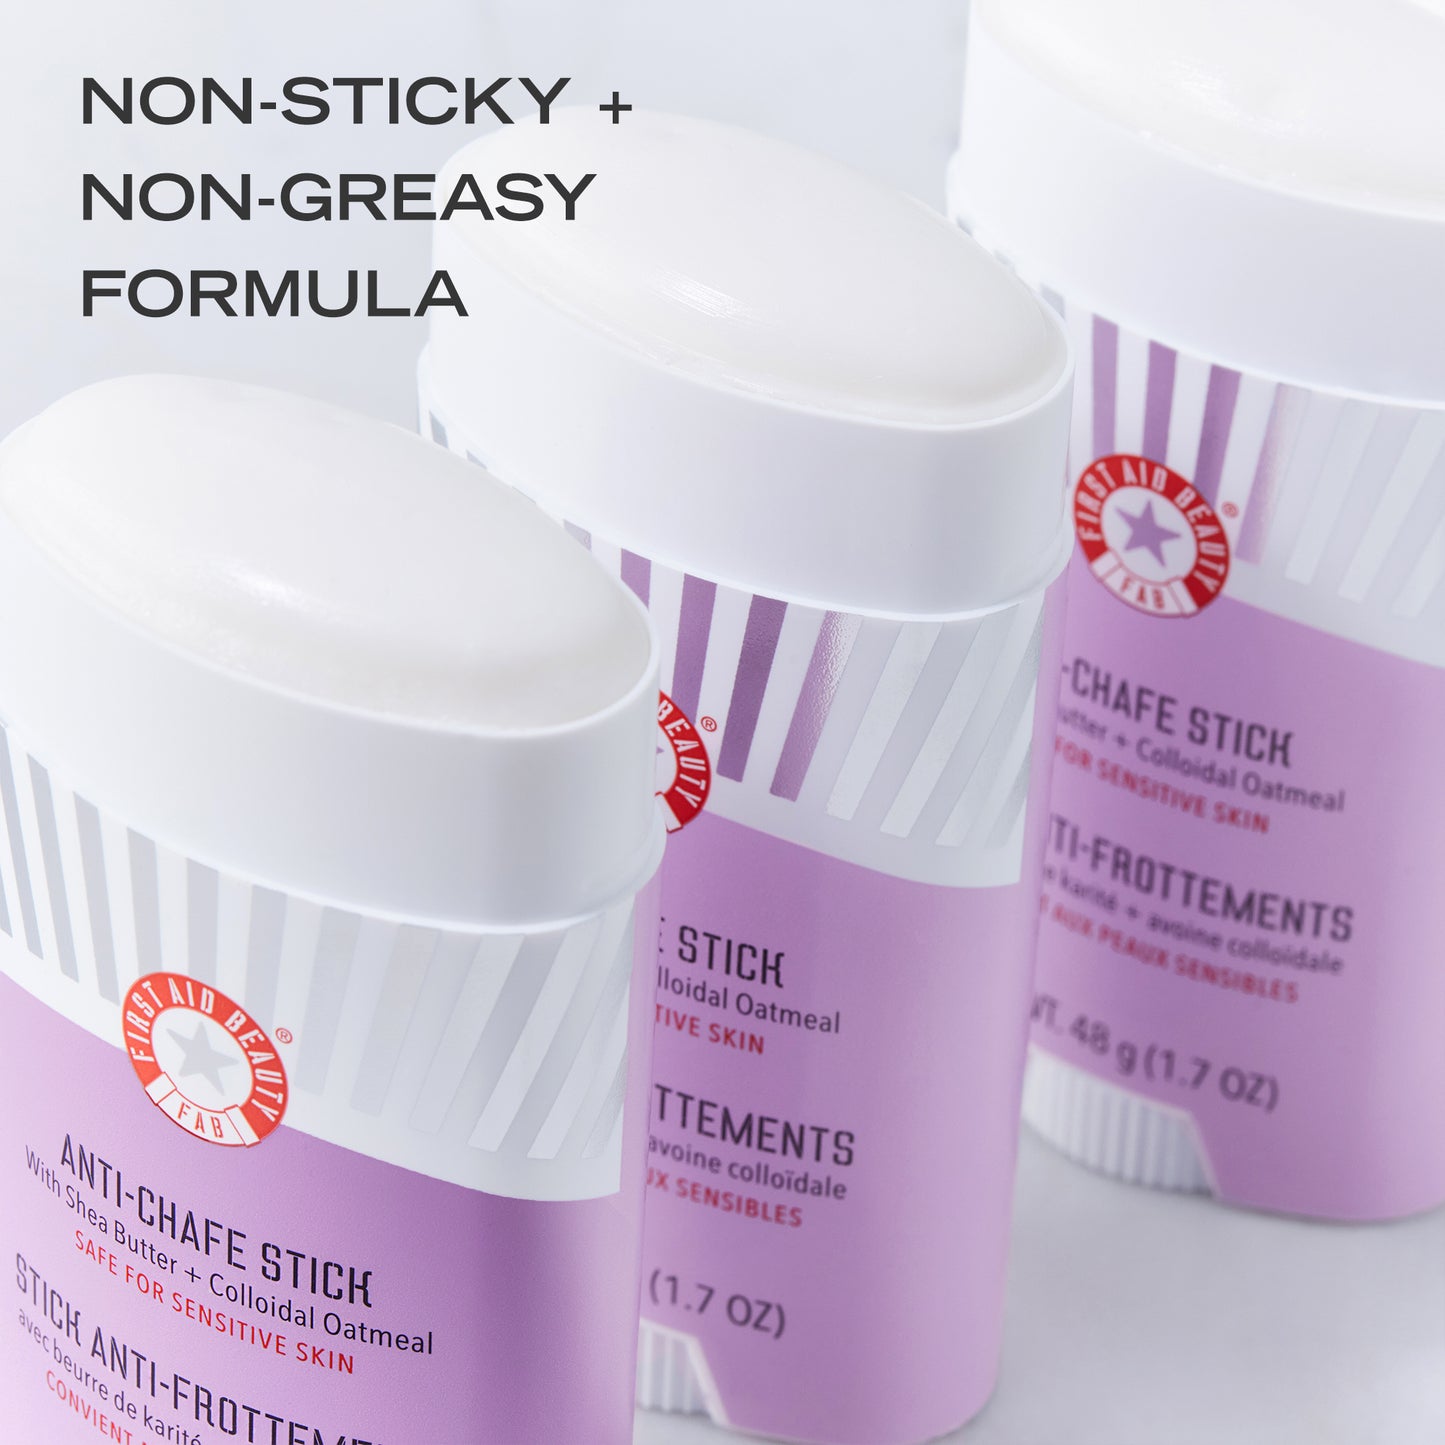 Anti-Chafe Stick with Shea Butter+ Colloidal Oatmeal